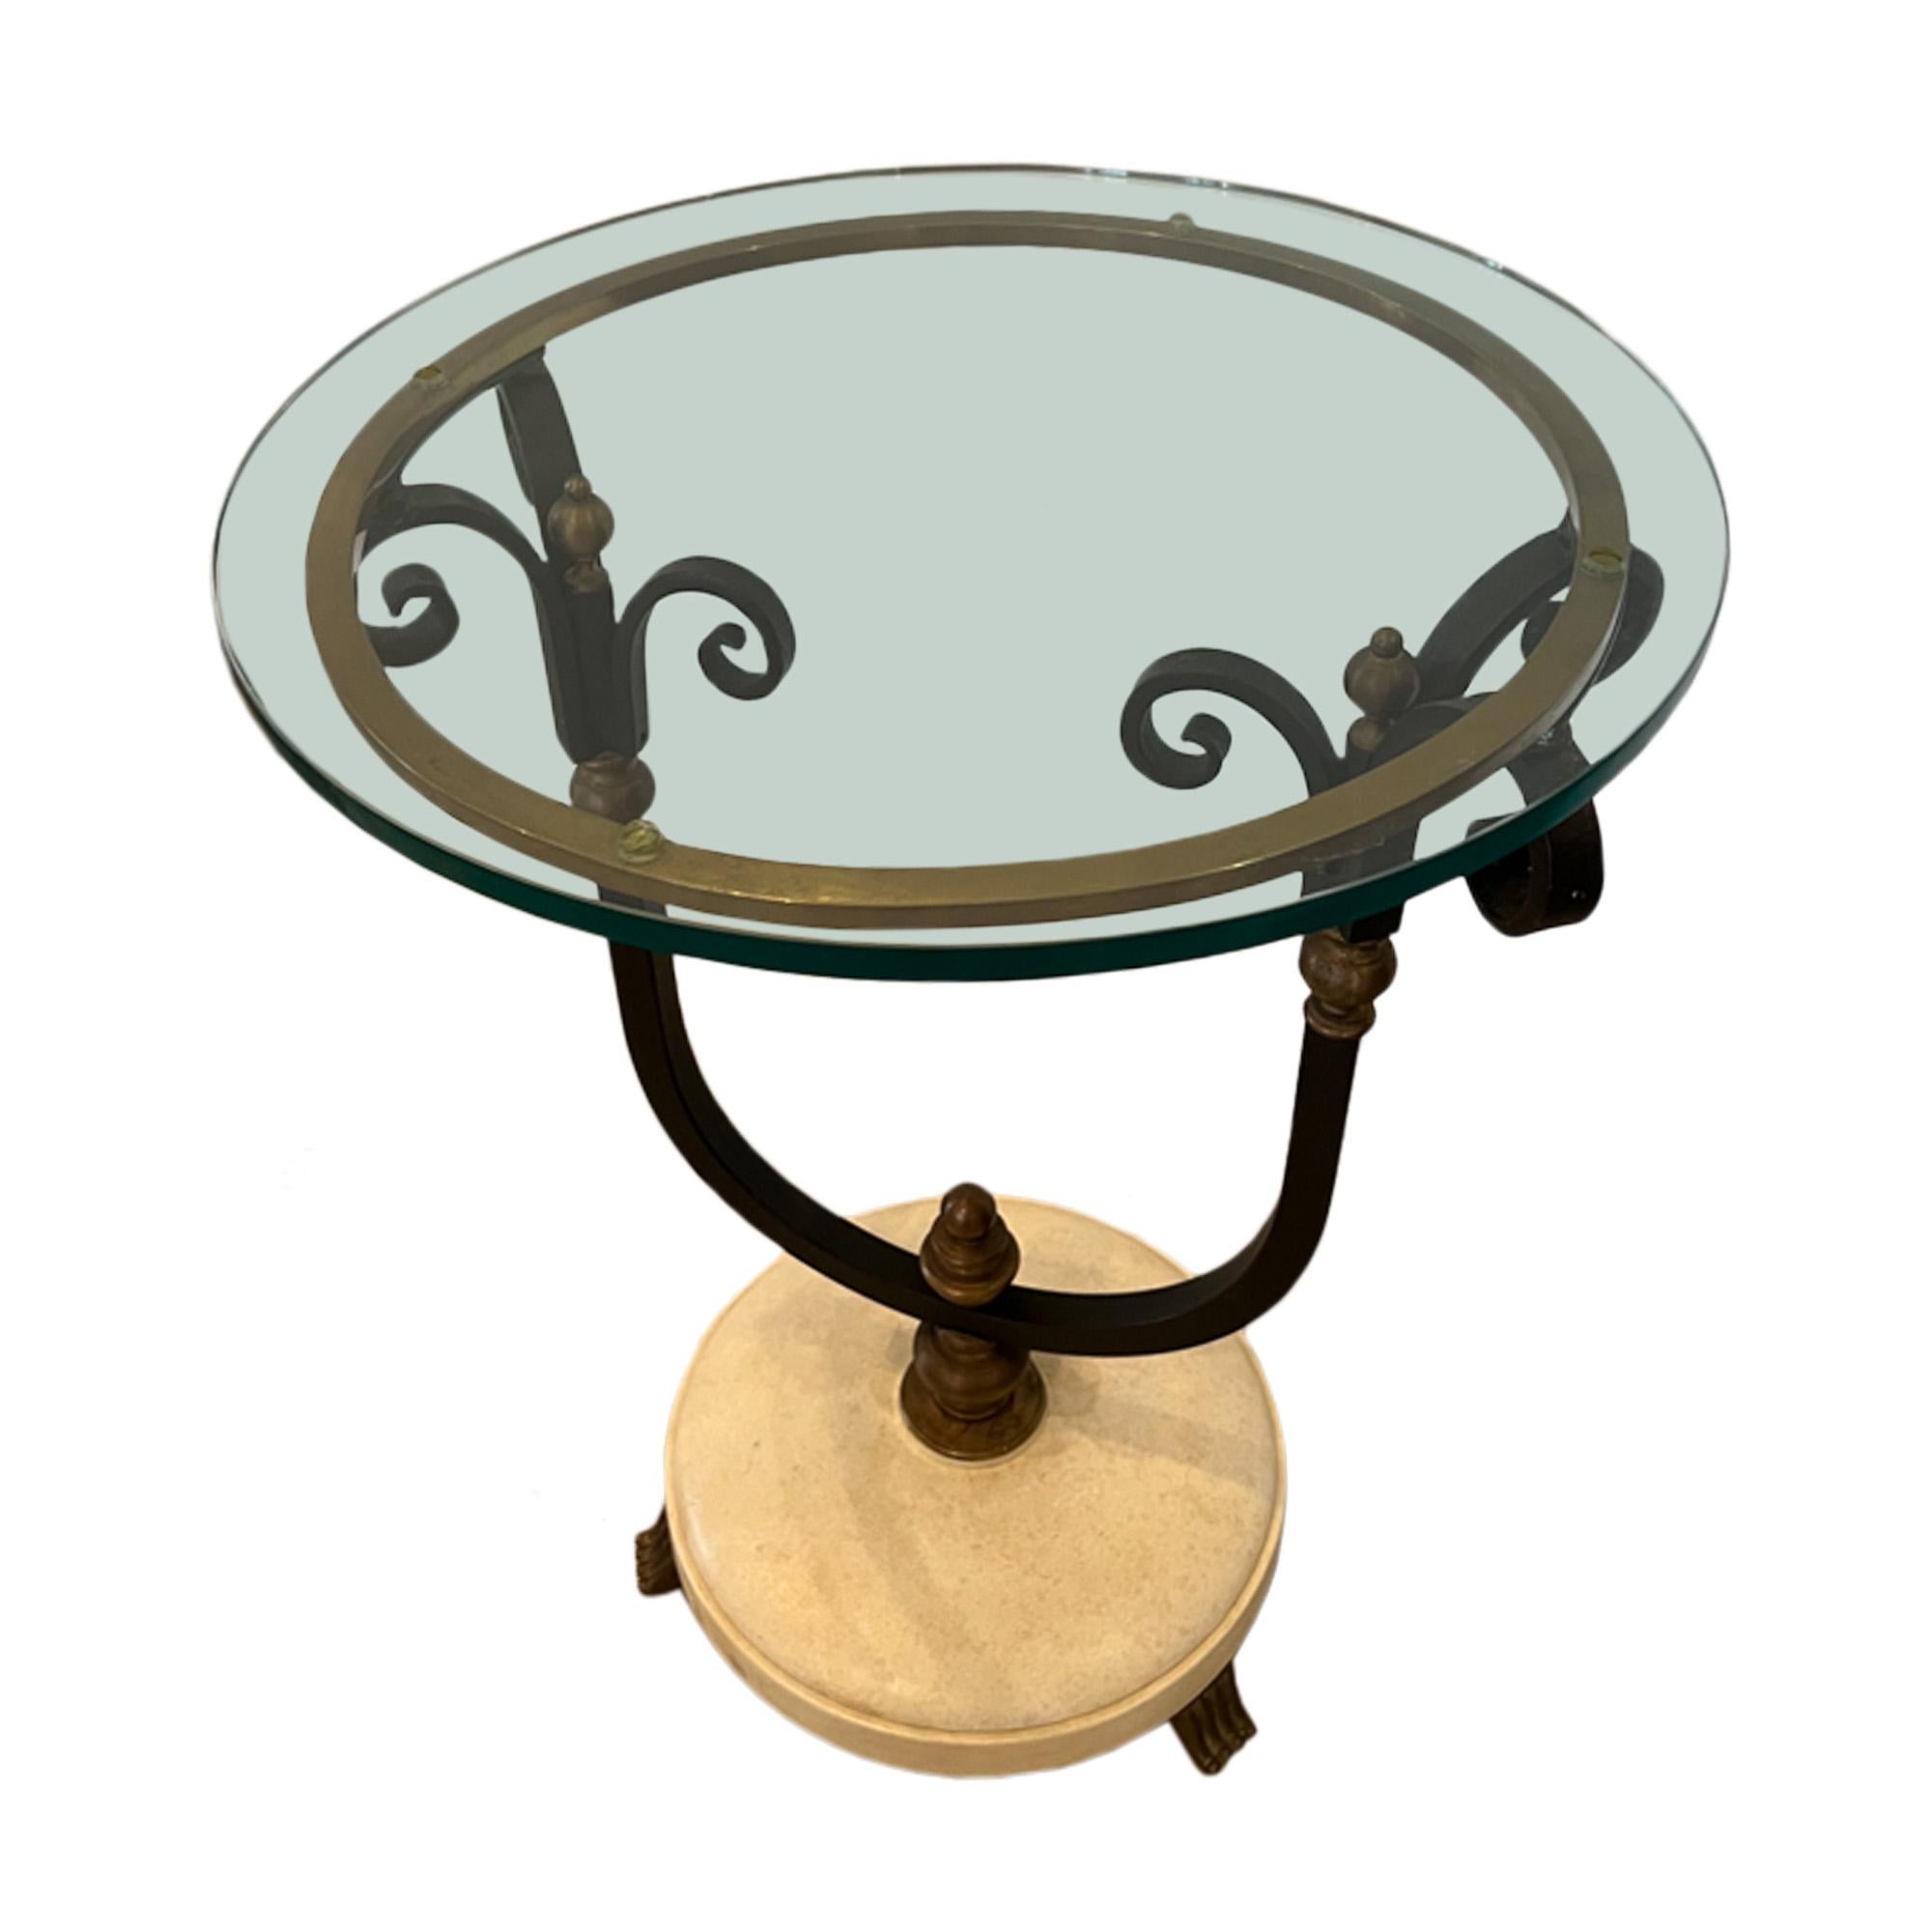 A stylish pair of glass topped side tables, crafted from wrought iron and brass. The base is painted faux parchment with 3 brass feet on each piece. 

Made in France in the 1960s.

The base diameter is 32cm.